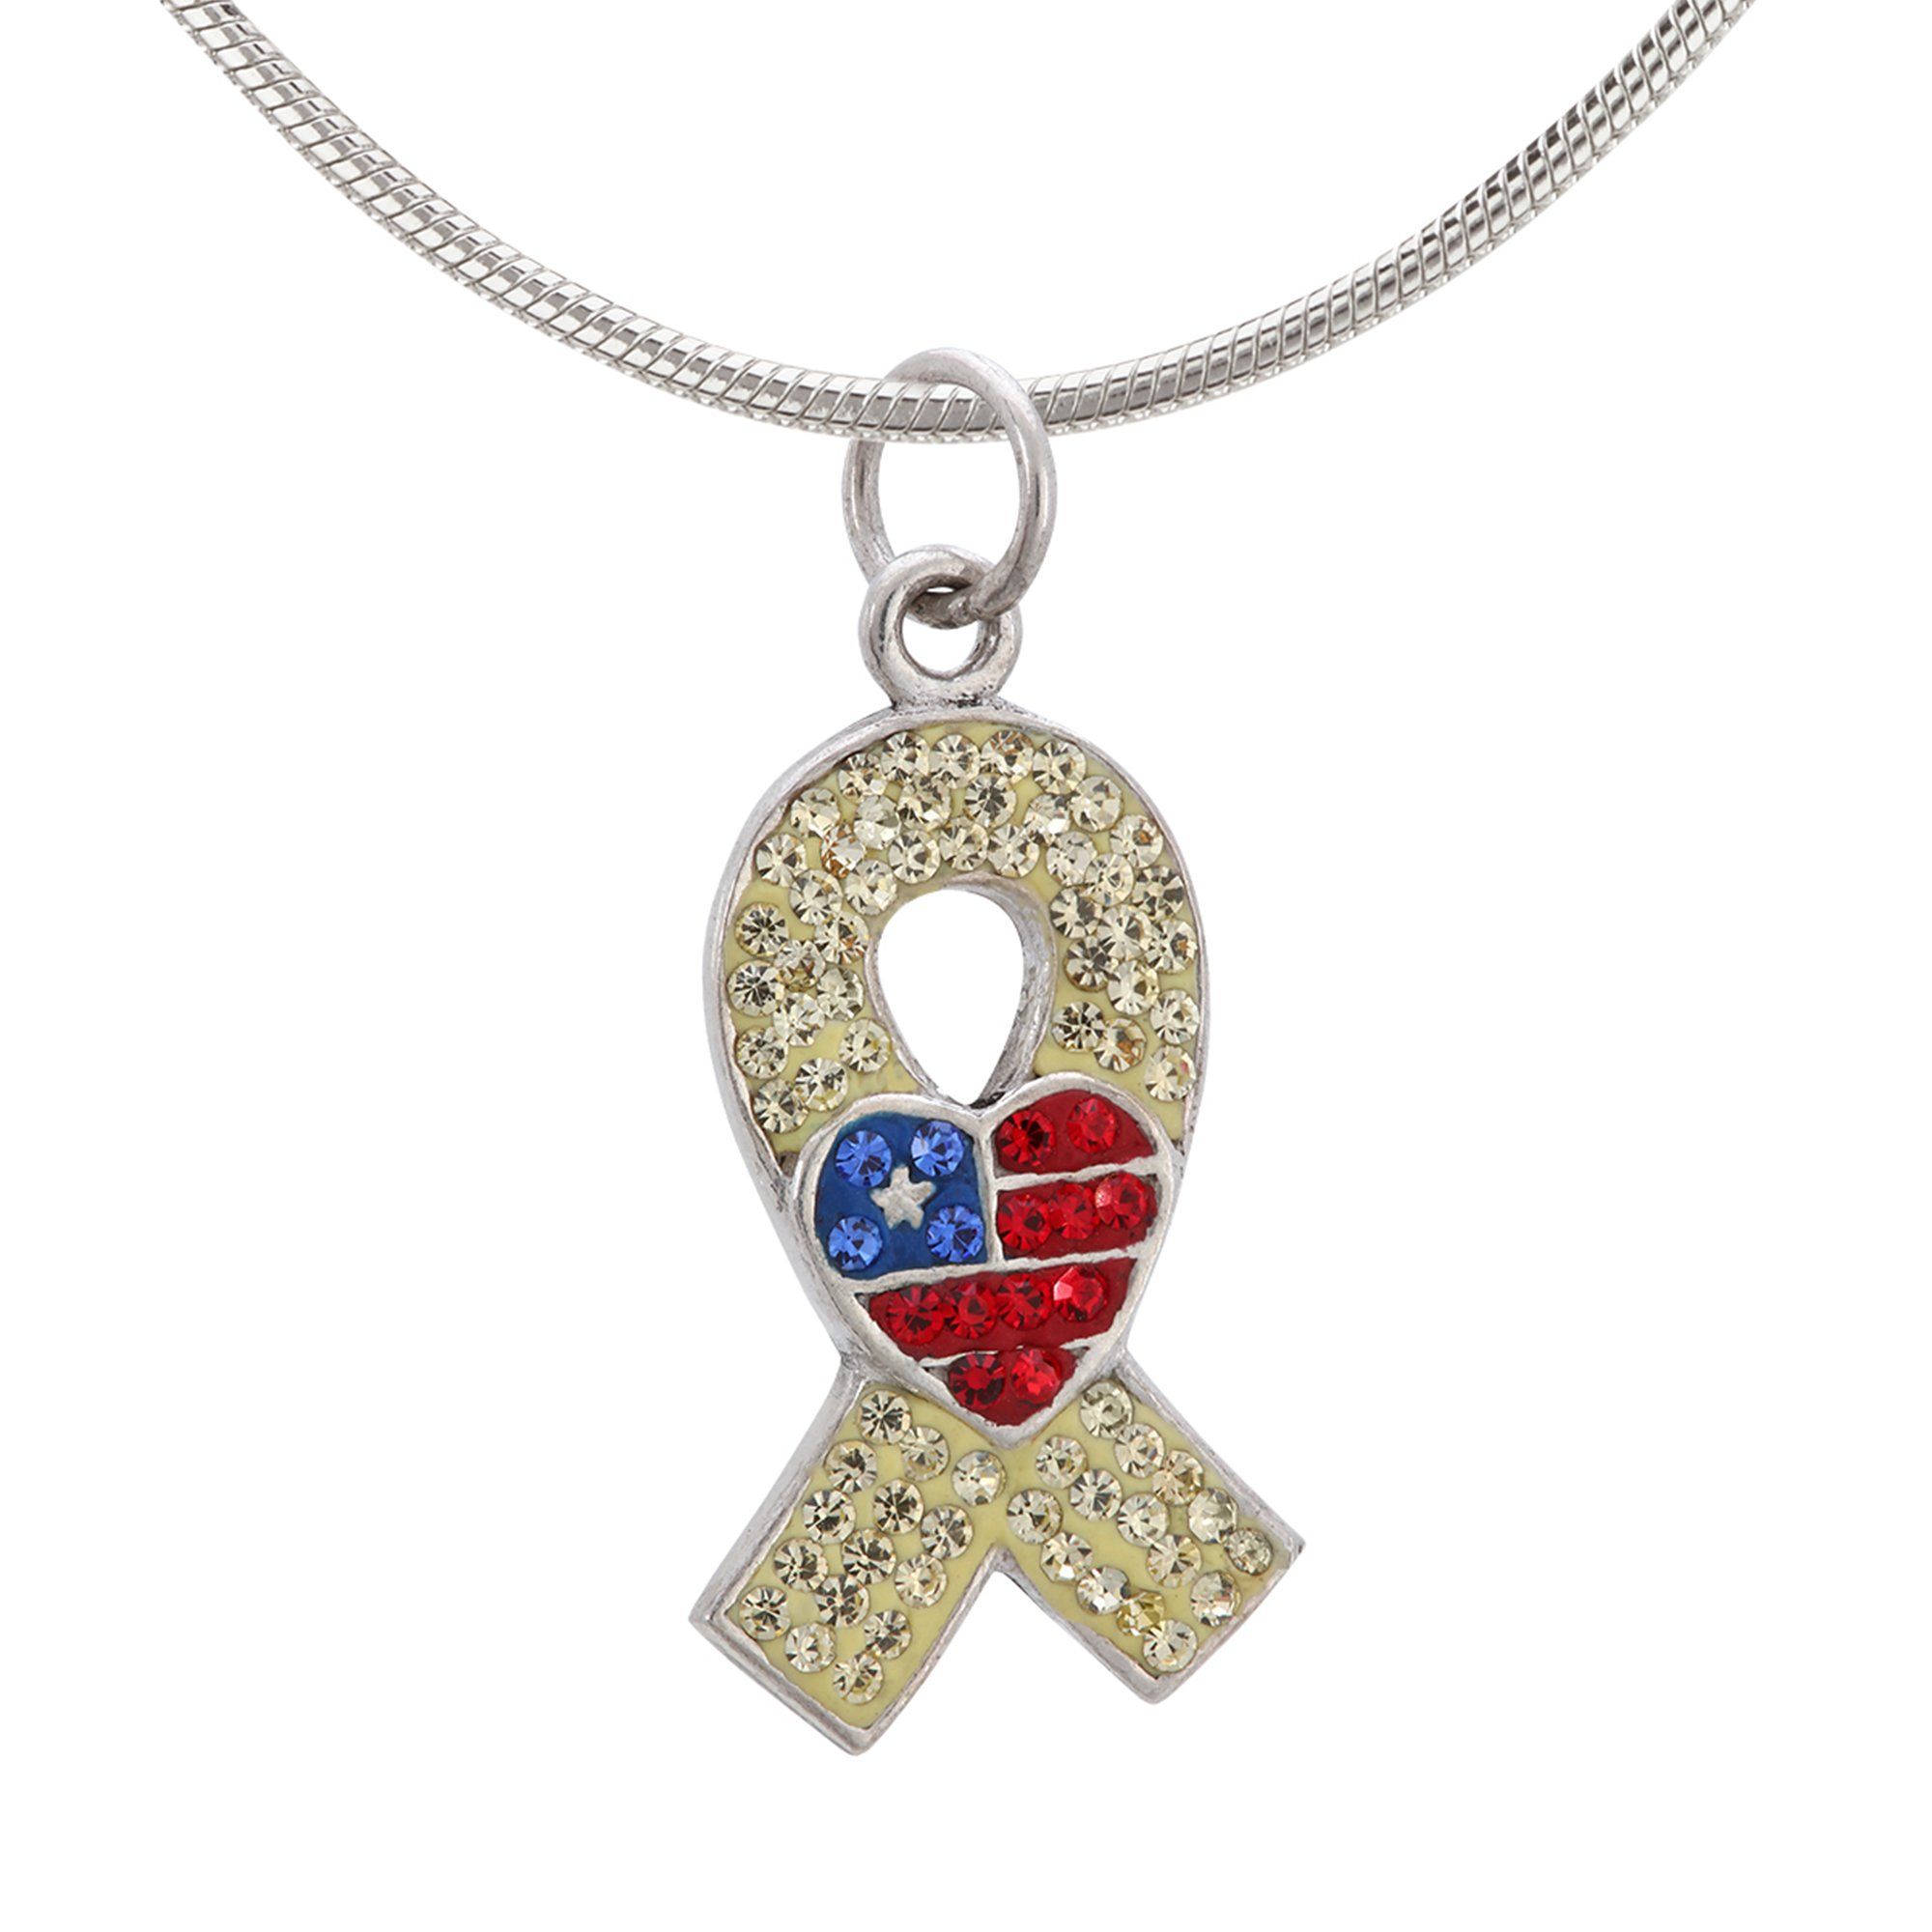 American Heart Yellow Ribbon Crystal & Sterling Necklace - With Diamond Cut Chain